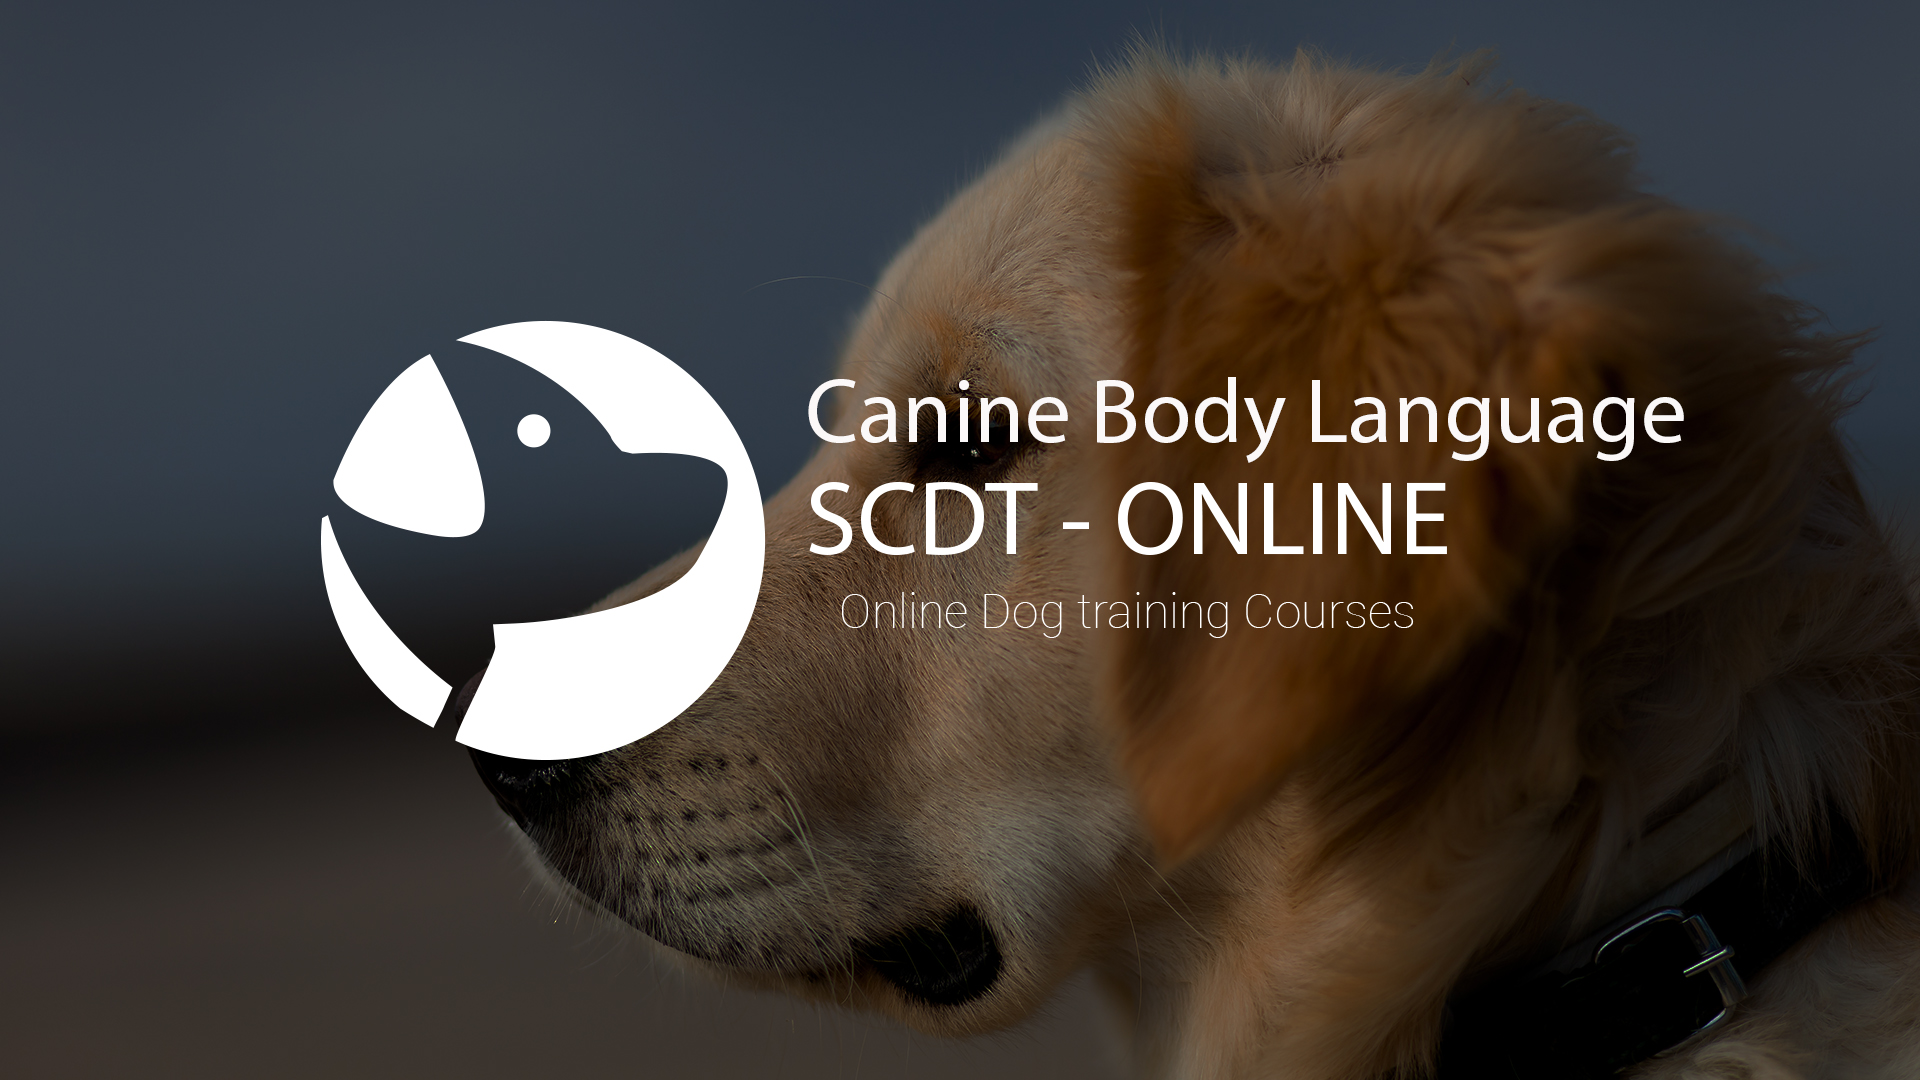 Do More With Your Dog | SCDT - ONLINE